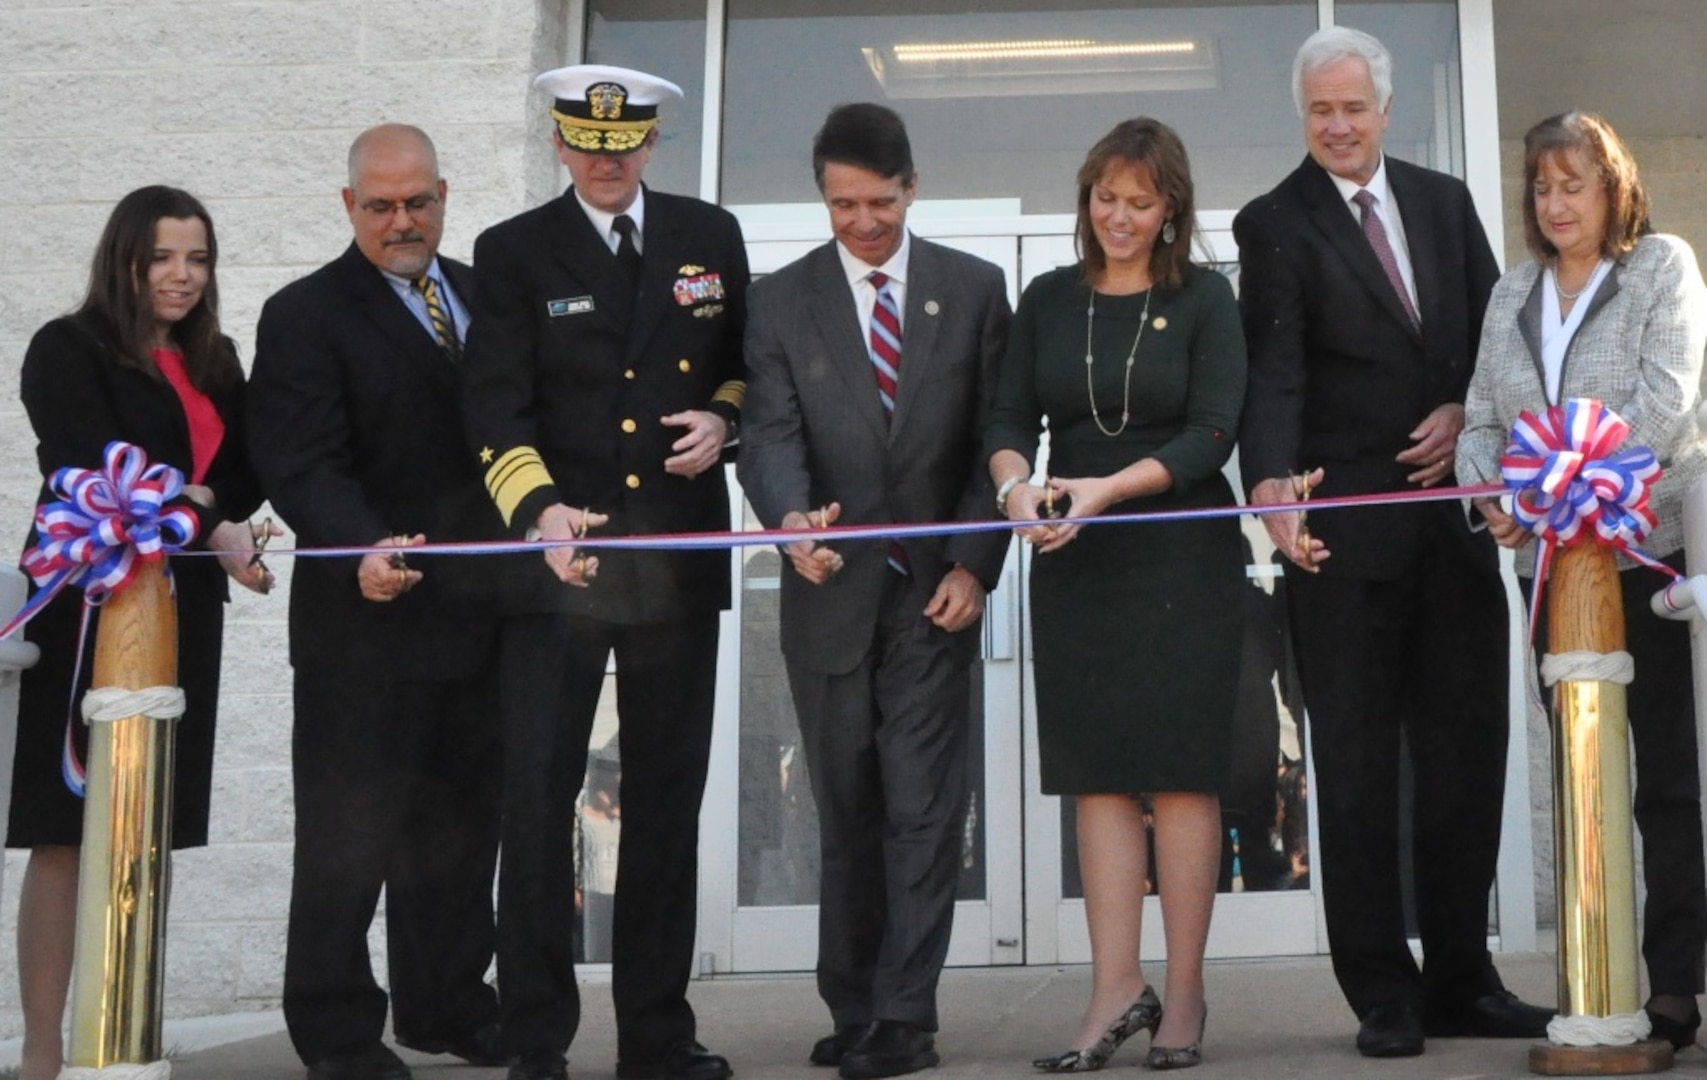 IMAGE: DAHLGREN, Va. (Nov. 1, 2018) - Navy leaders and scientists are joined by local officials at the ribbon cutting ceremony for the new Naval Surface Warfare Center Dahlgren Division (NSWCDD) Missile Support Facility. The facility features state-of-the-art labs, offices, and equipment for more than 300 NSWCDD Strategic and Computing Systems Department scientists, engineers, and technical experts who develop, test, and maintain the Submarine Launched Ballistic Missile fire control and mission planning software. From left to right: Lauren Falkenstein, a scientist representing the NSWCDD Strategic and Computing Systems Department's newly-hired junior workers; John Fiore, NSWCDD technical director; Vice Adm. Johnny Wolfe, director of Navy Strategic Systems Programs; U.S. Rep. Rob Wittman; Margaret Ransone, Virginia delegate; Kyle Jones, head of the NSWCDD Strategic and Computing Systems Department; Lisa Weisbeck, a scientist representing the NSWCDD Strategic and Computing Systems Department's senior level workers.